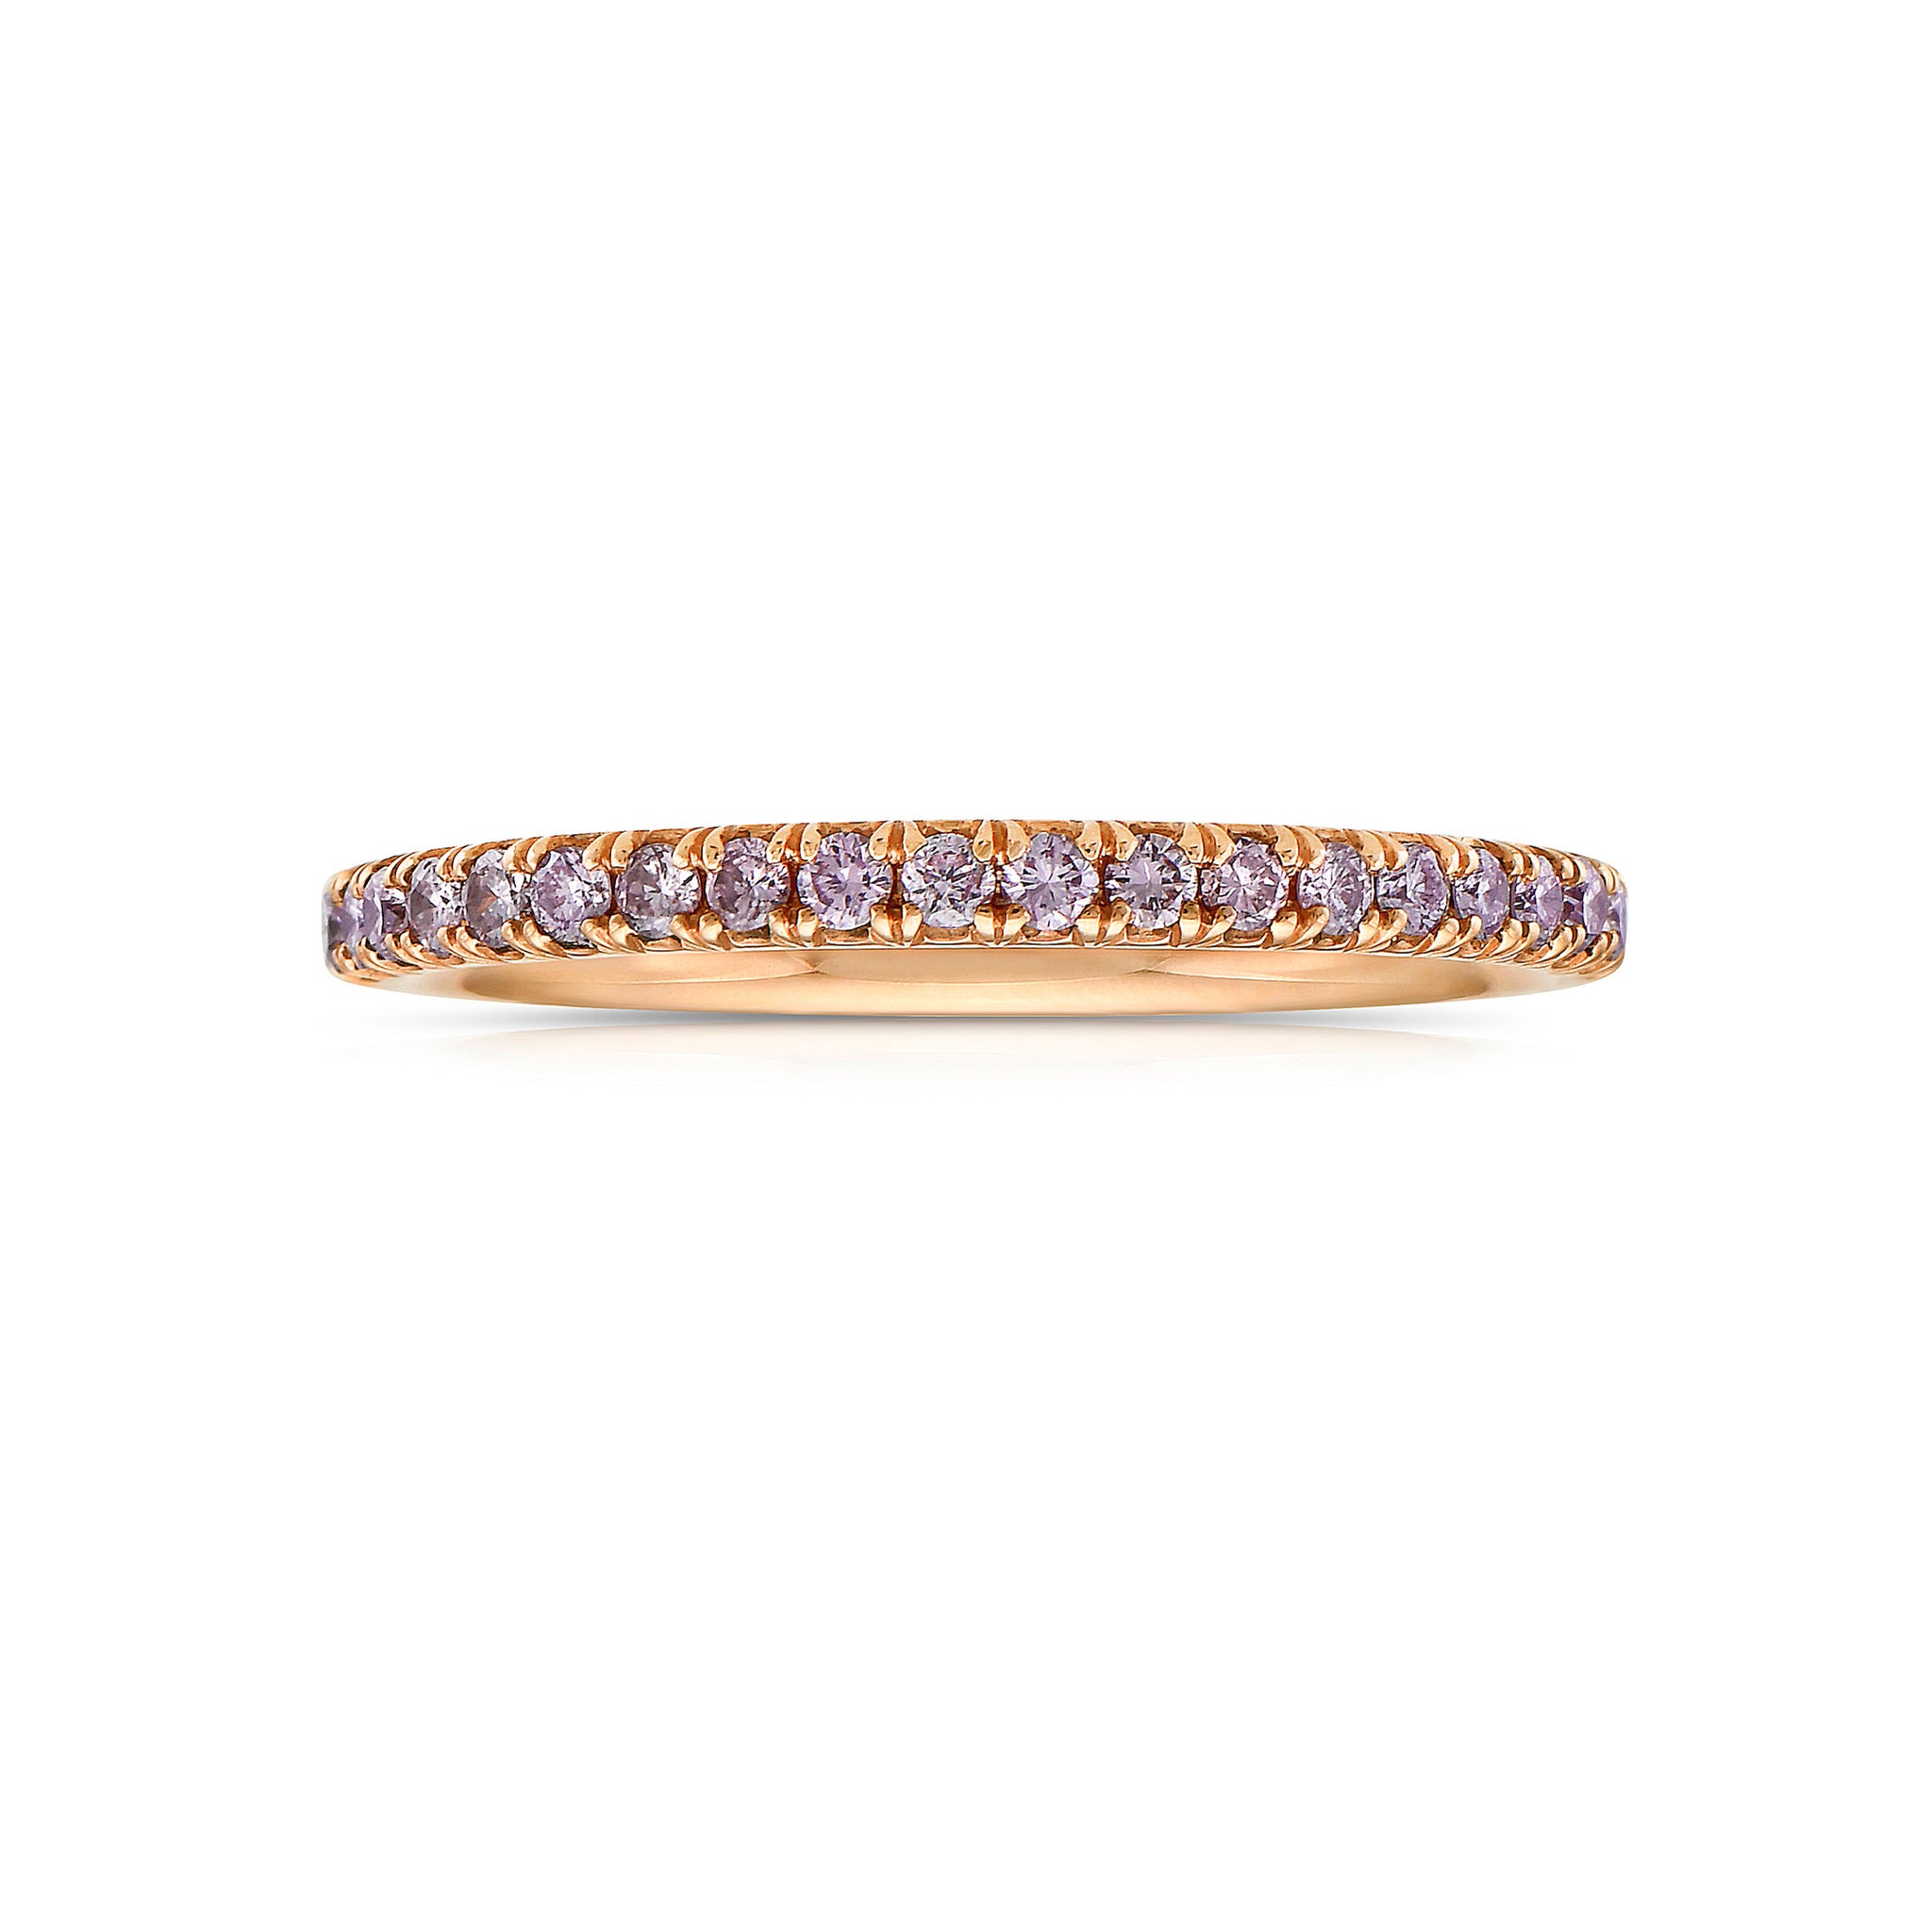 Simple pink diamond eternity ring. Natural pink diamond eternity ring. Delicate pink diamond eternity band. Pink diamond rounds. Natural pink diamonds. Fancy pink diamond round ring.